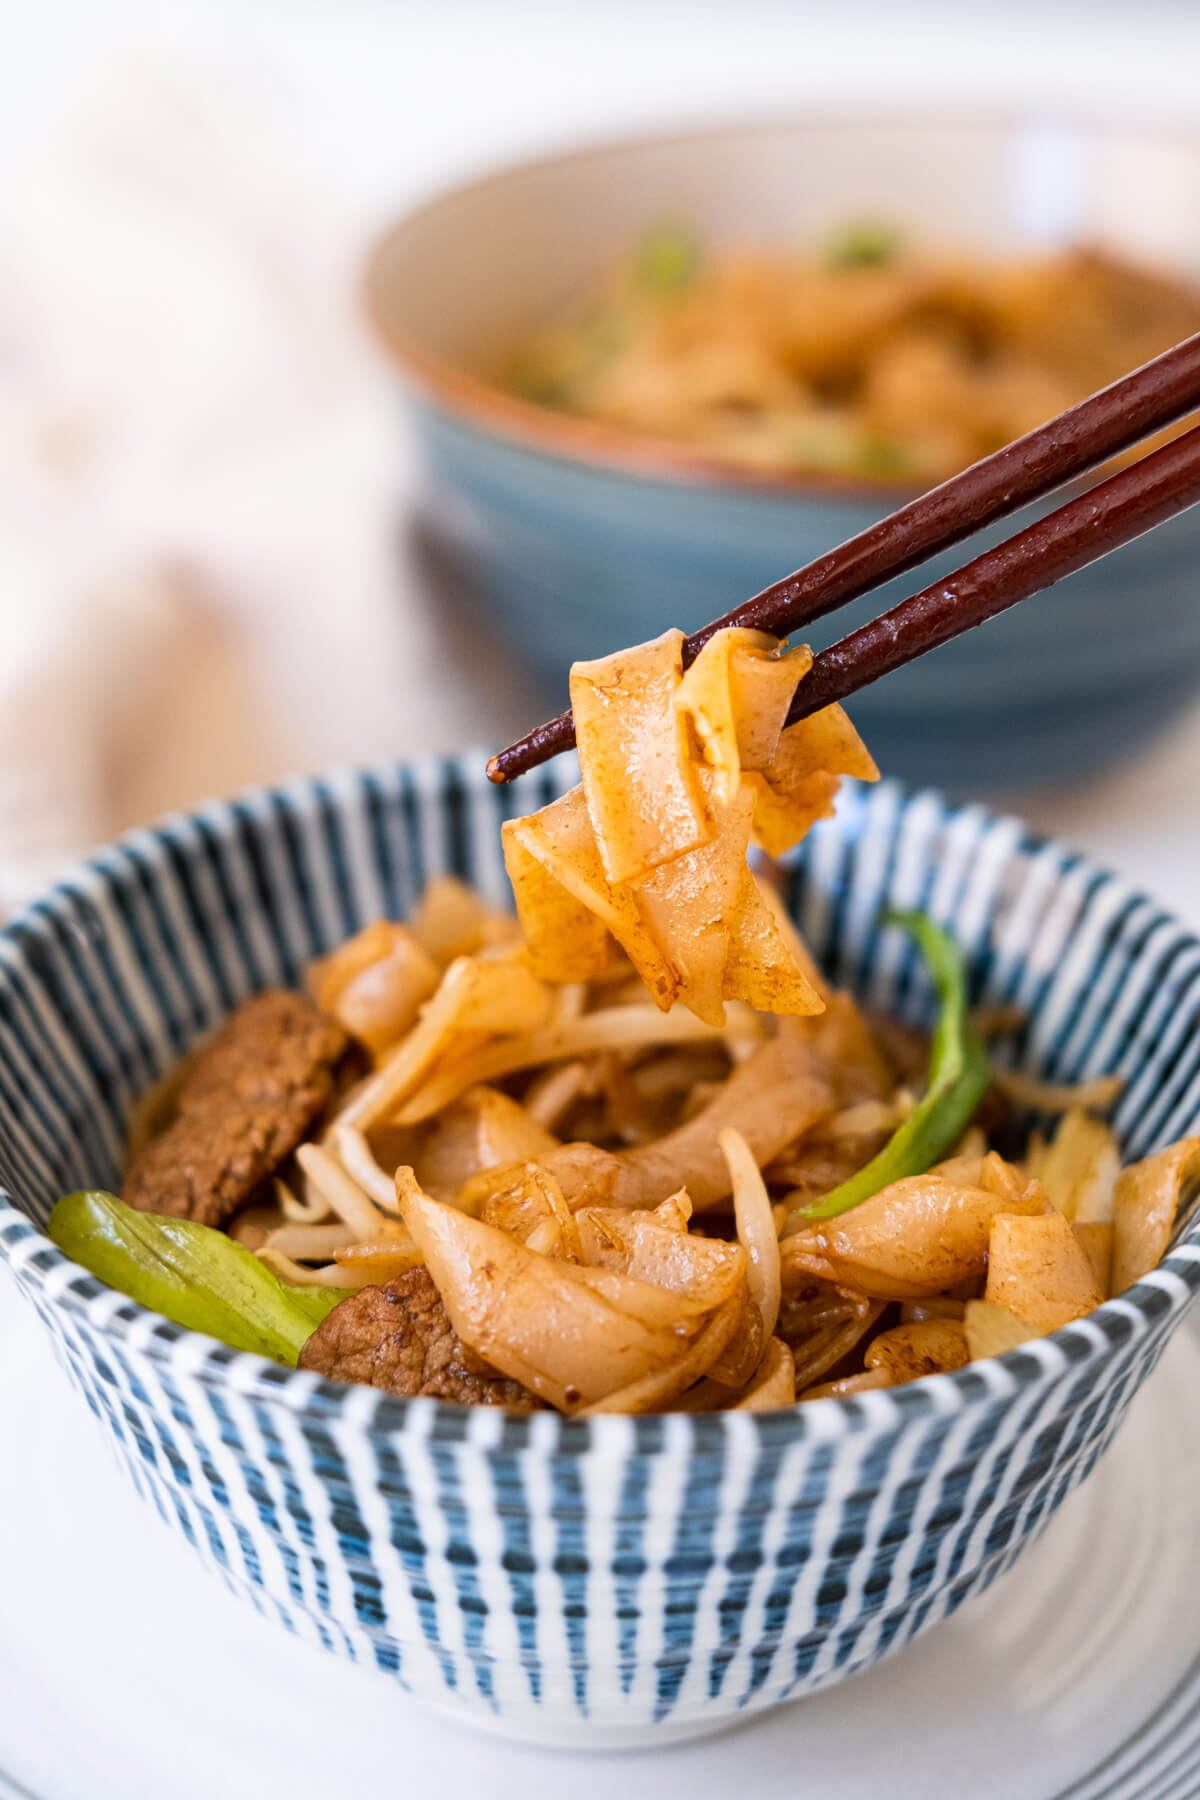 Flavorful seasoned flat rice noodles served in a blue bowl and picked up with a pair of chopsticks.